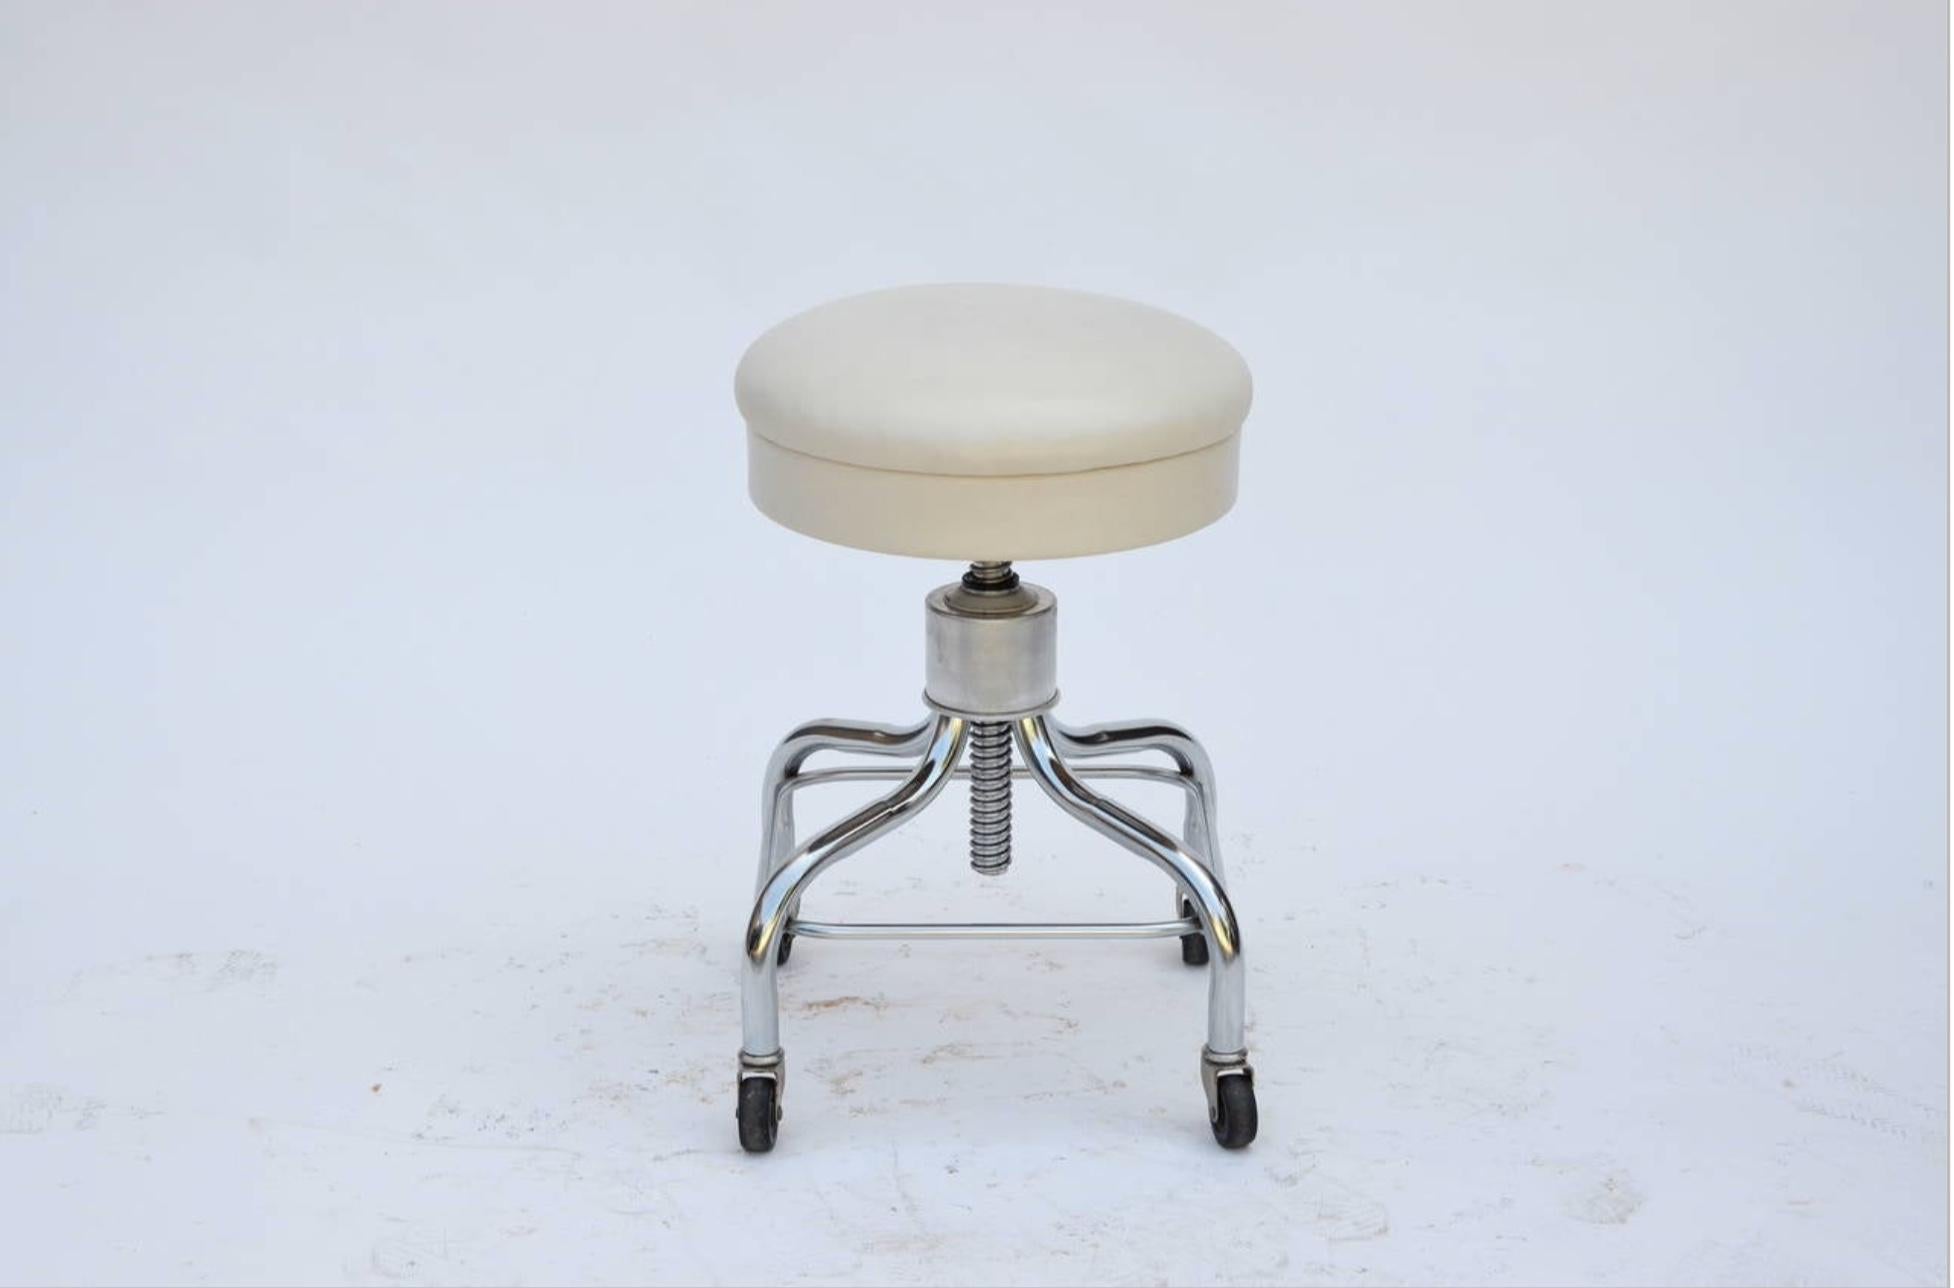 Set of 4 vintage chrome and white leather adjustable rolling stools. Heavy, sturdy and fully functional.

Great for an industrial kitchen.

The seat height adjusts from 16 inches to 25 inches.

The original vinyl on the seats and sides has